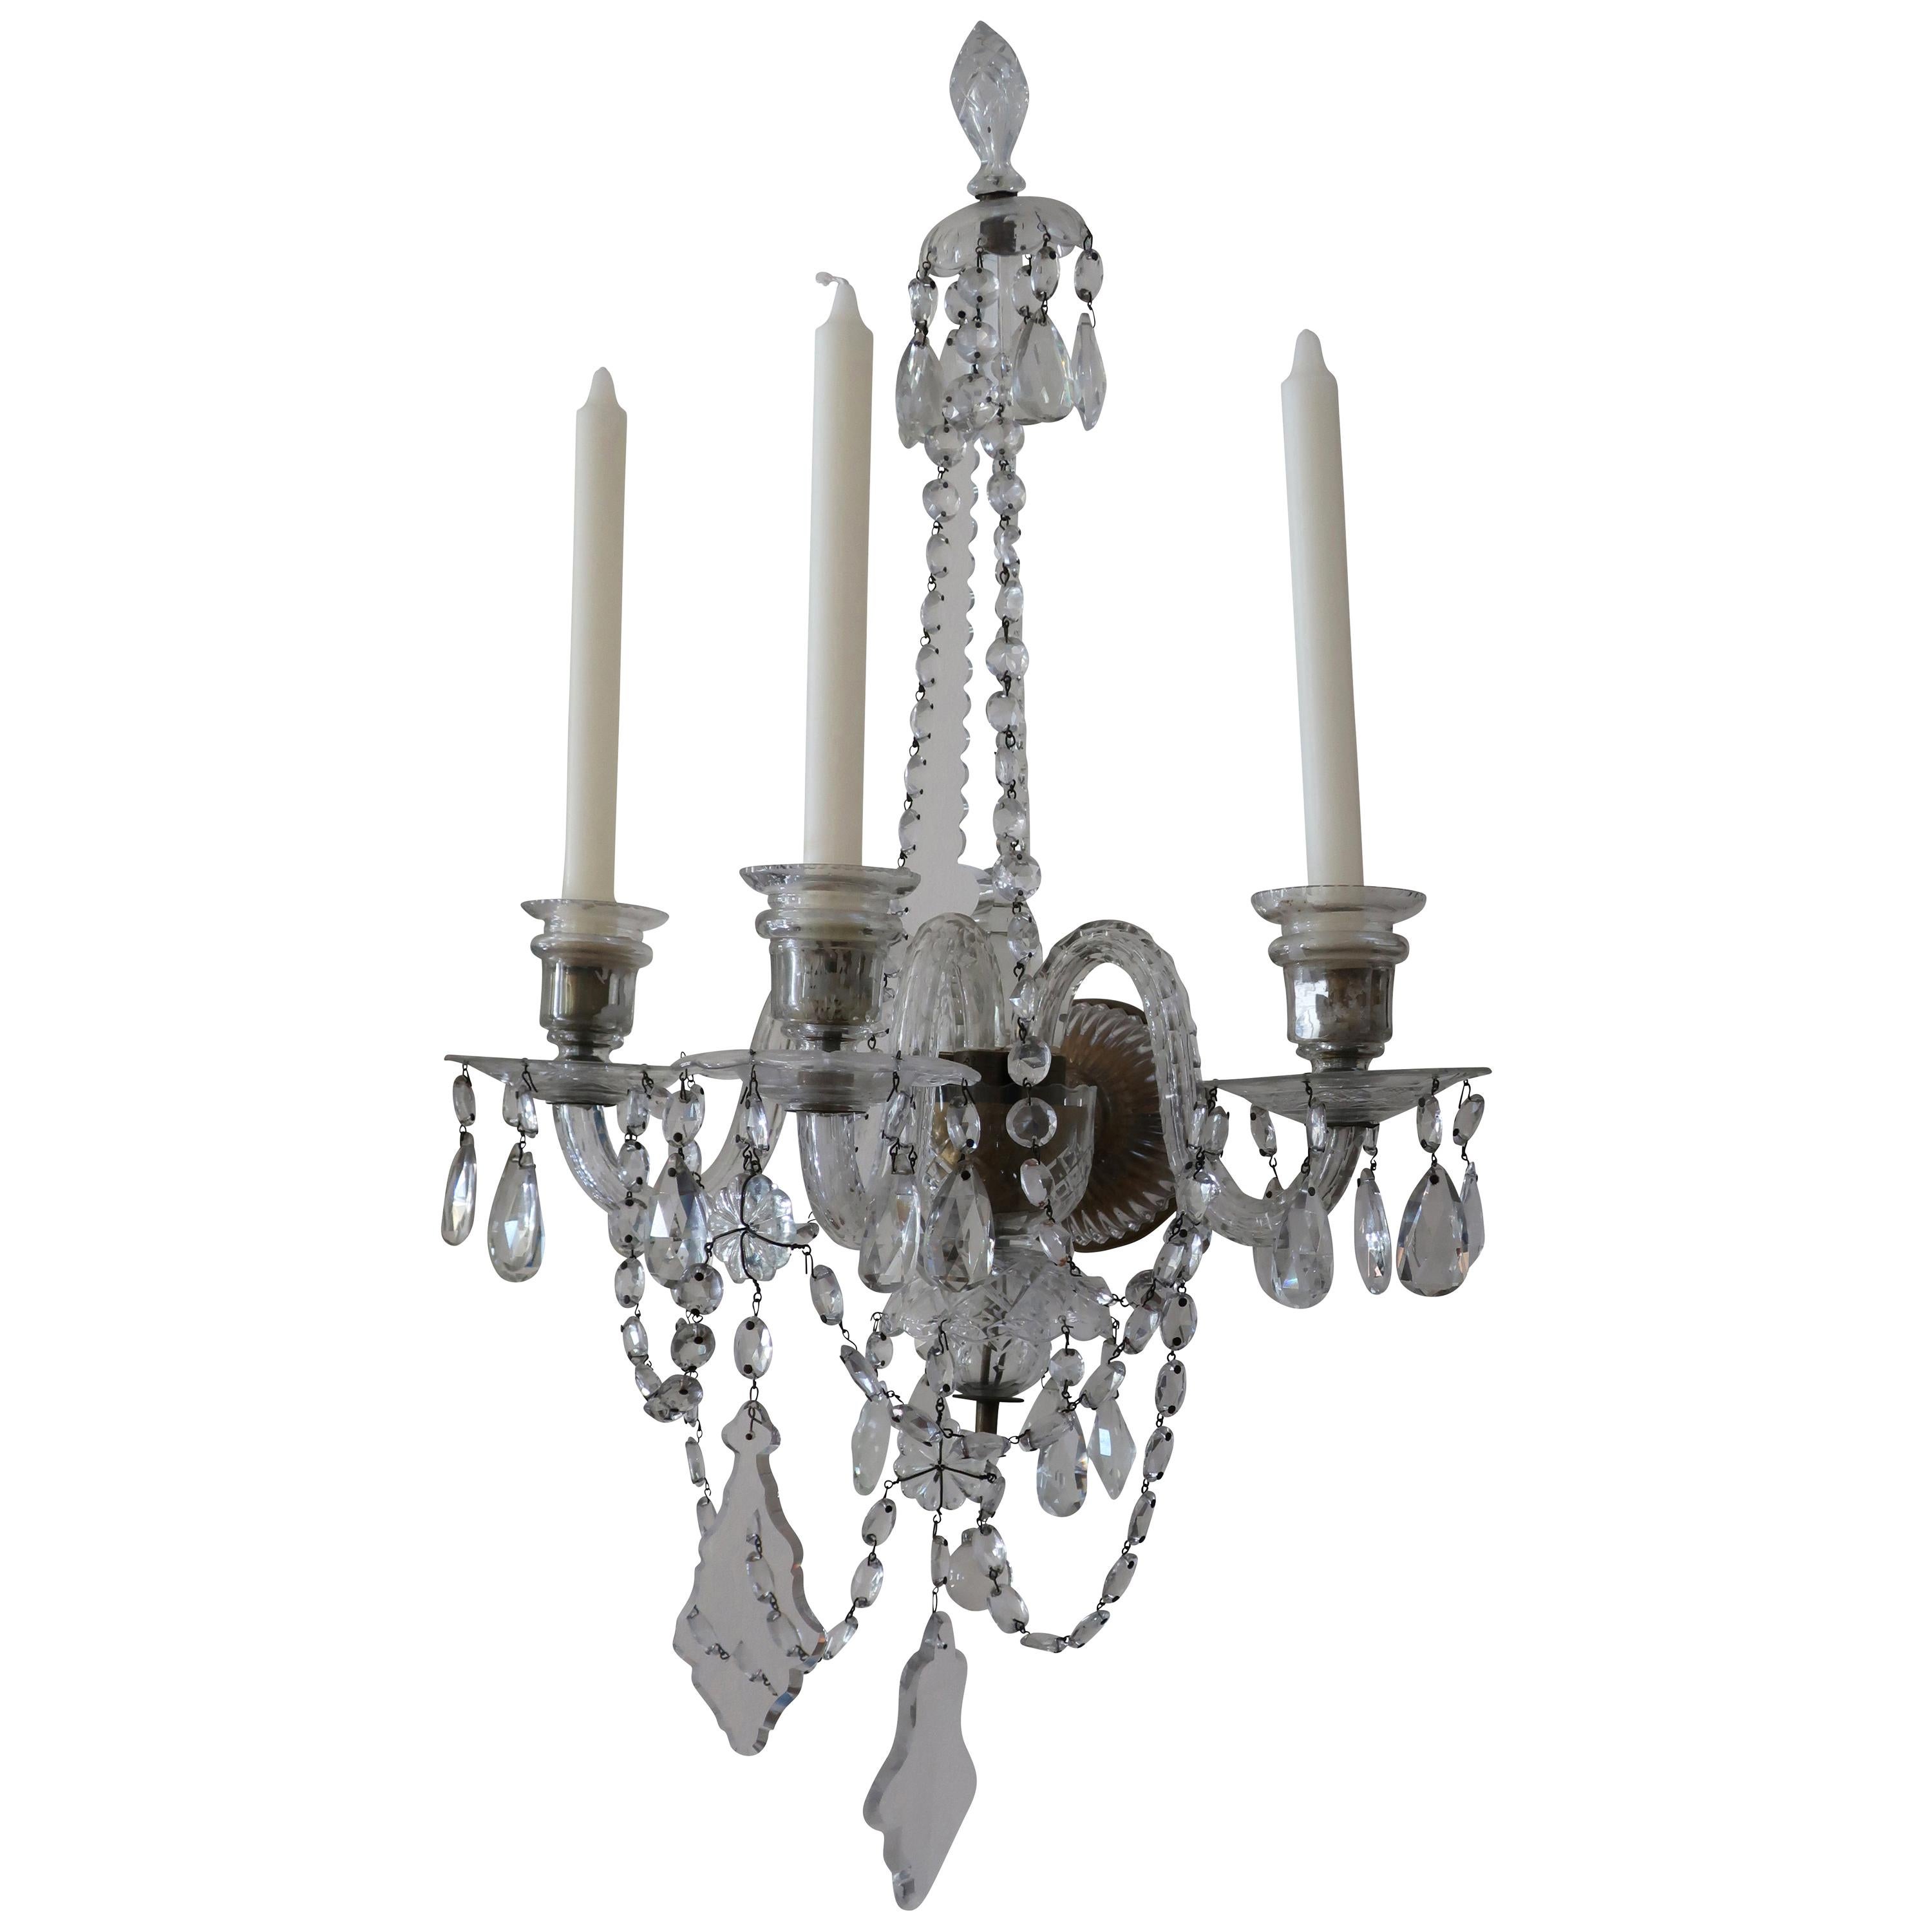 Pair of Baccarat Style Three Arm Crystal Wall Sconces